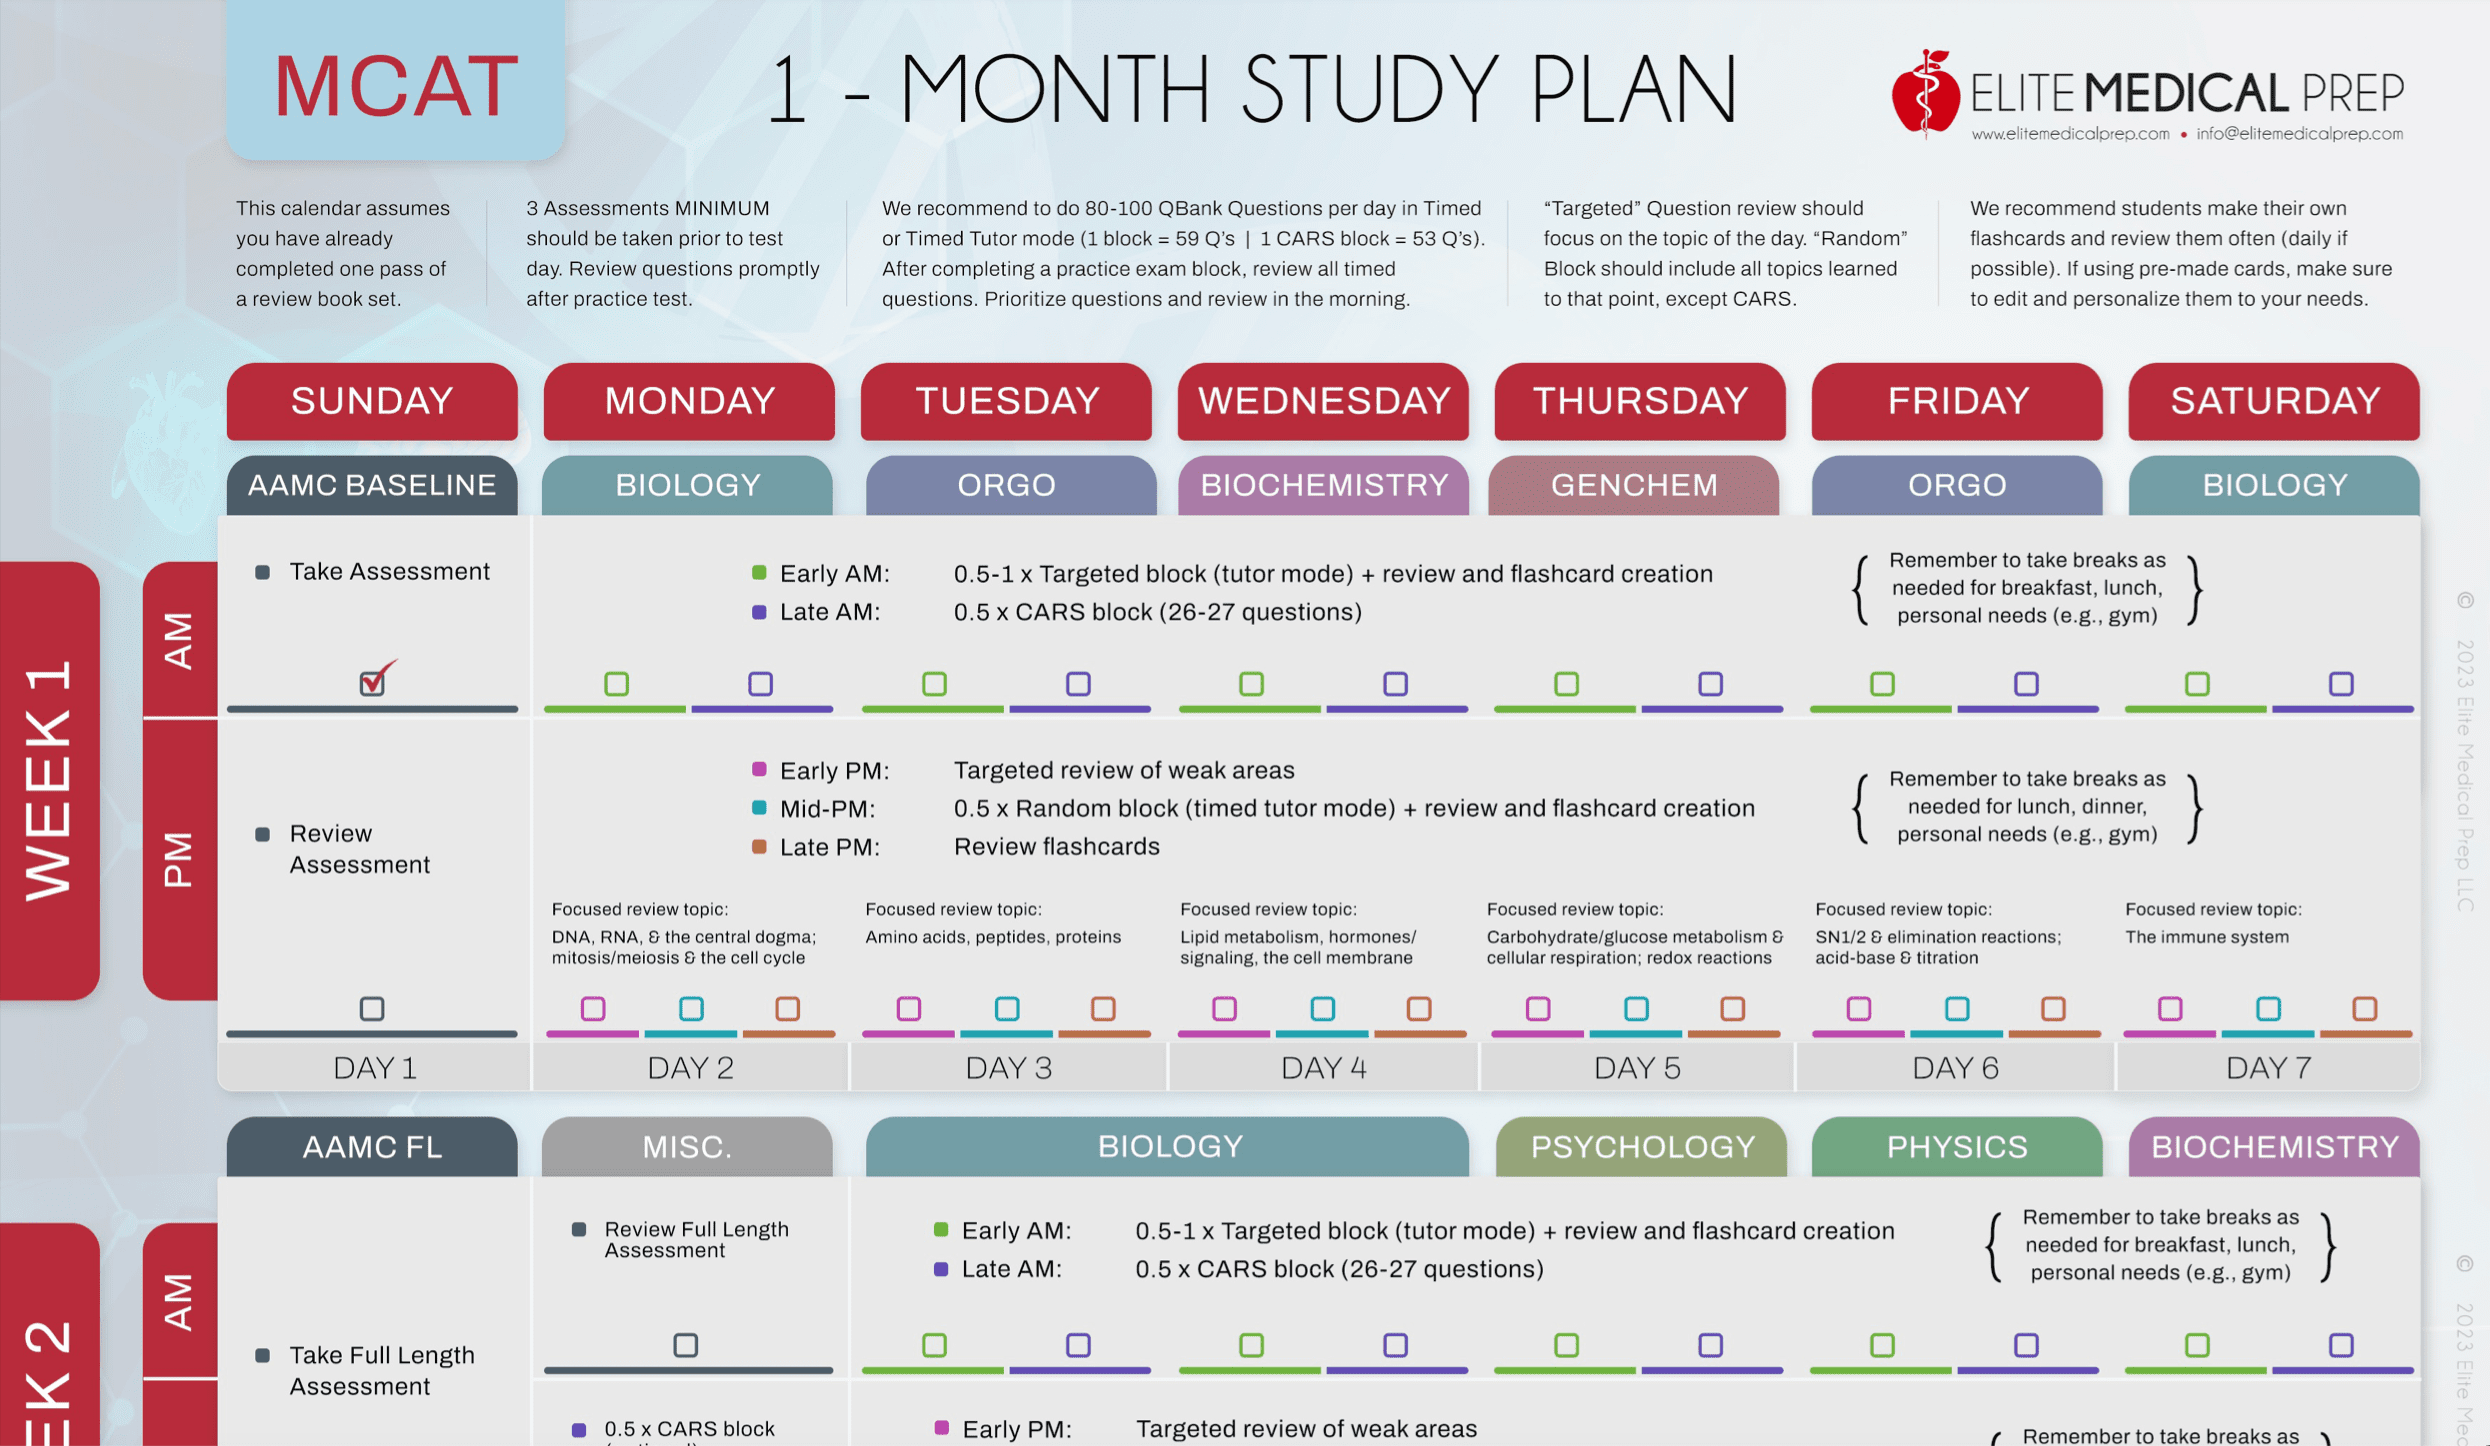 1-Month Study Planner preview image for MCAT by Elite Medical Prep